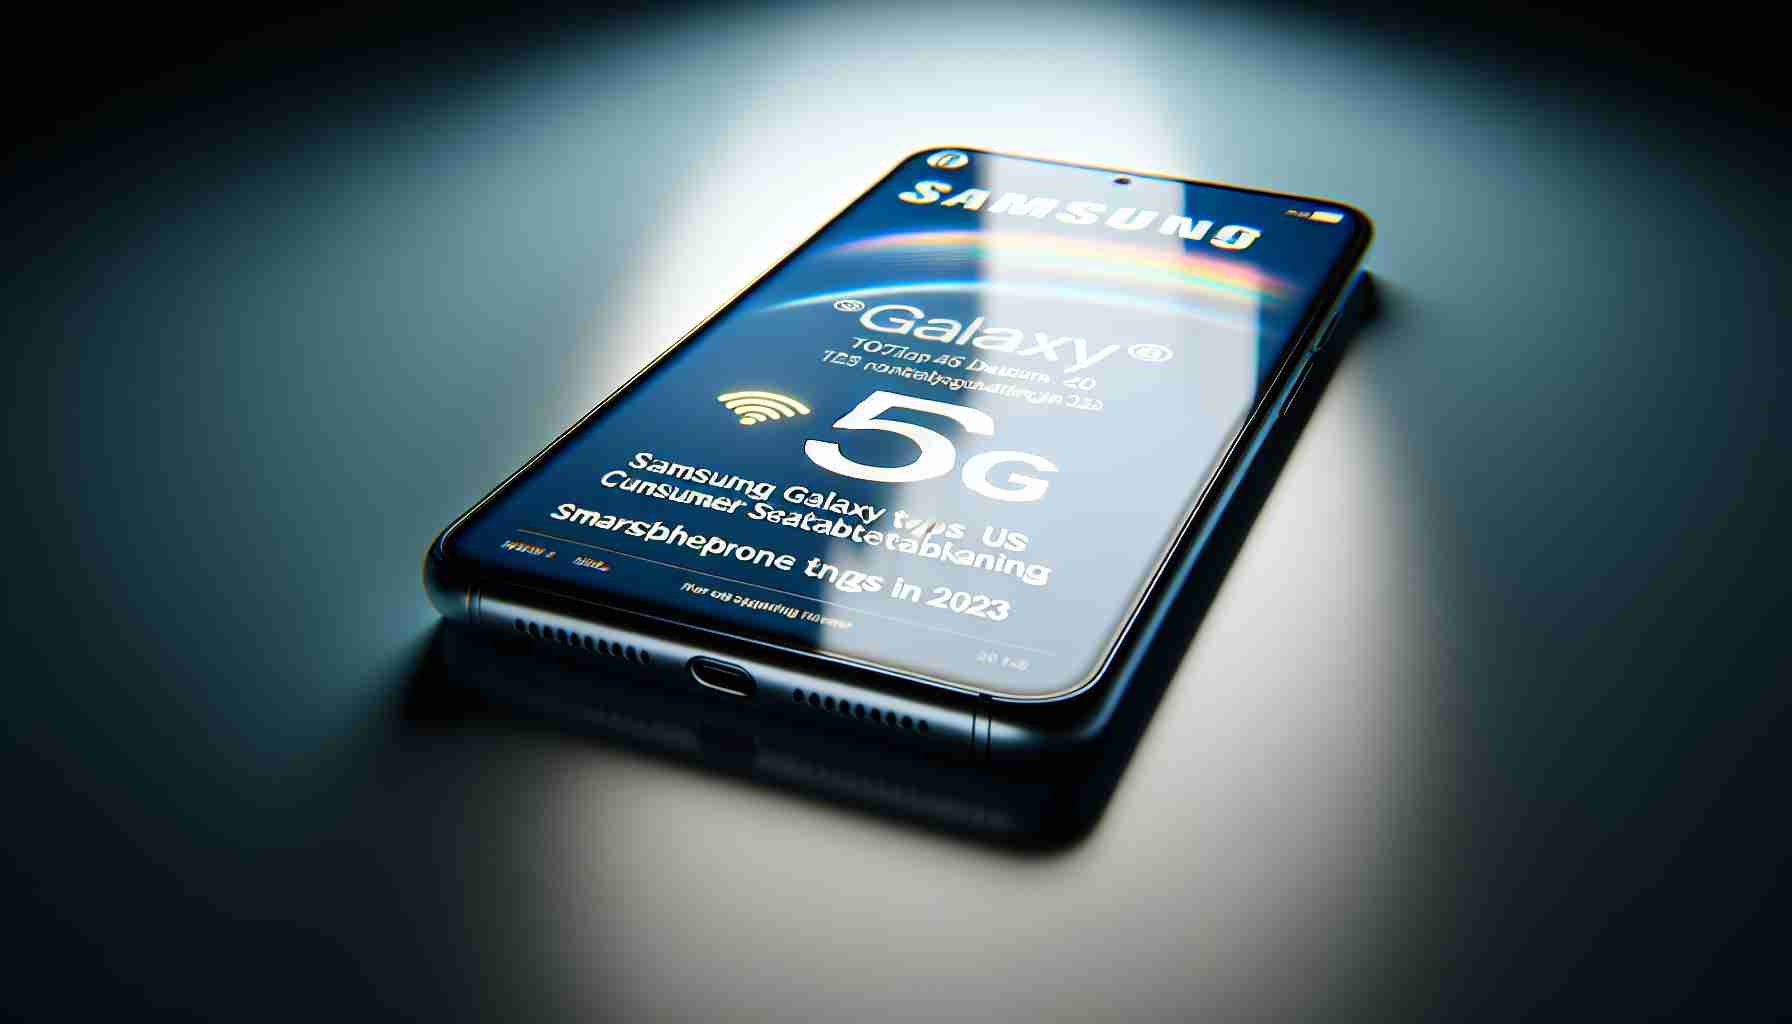 Samsung Galaxy Tops US Consumer Satisfaction Rankings for 5G Smartphones in 2023